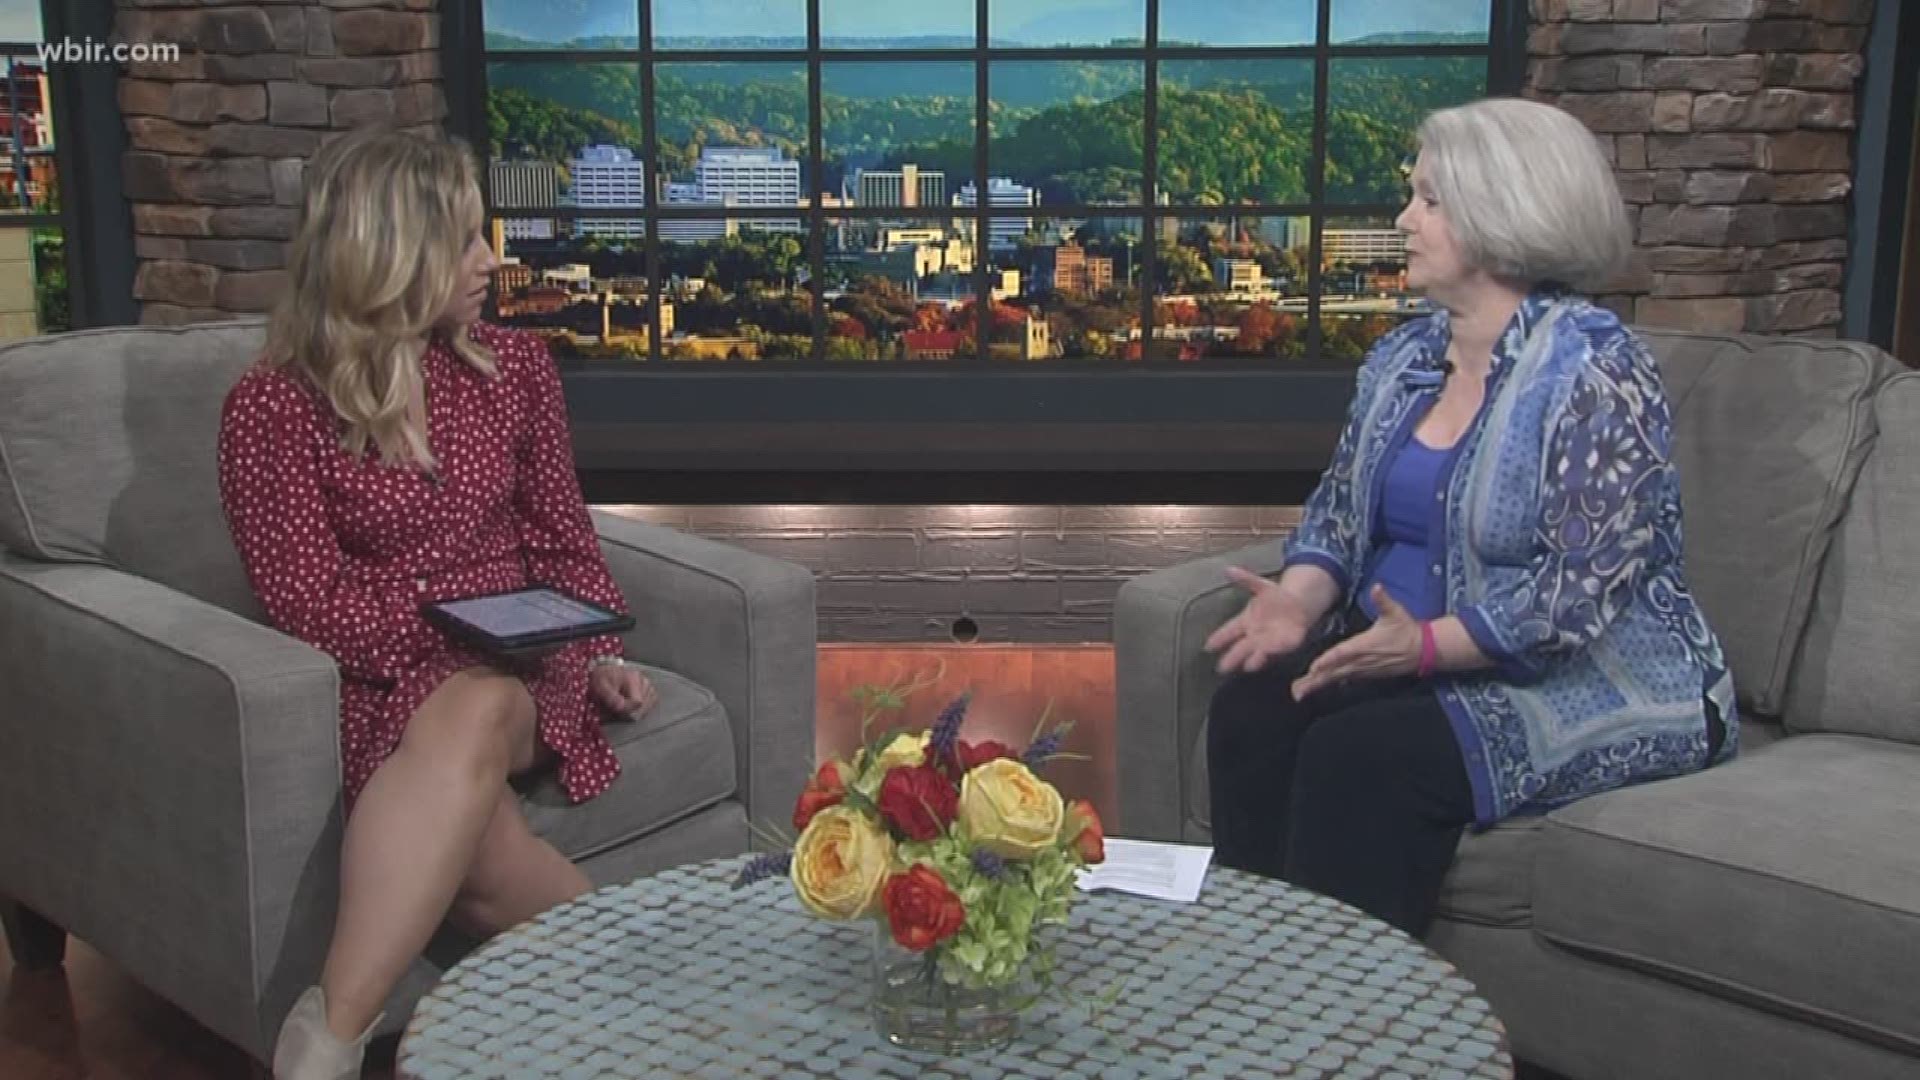 Dr. Jan Neece from East Tennessee Children's Hospital discusses OCD in children